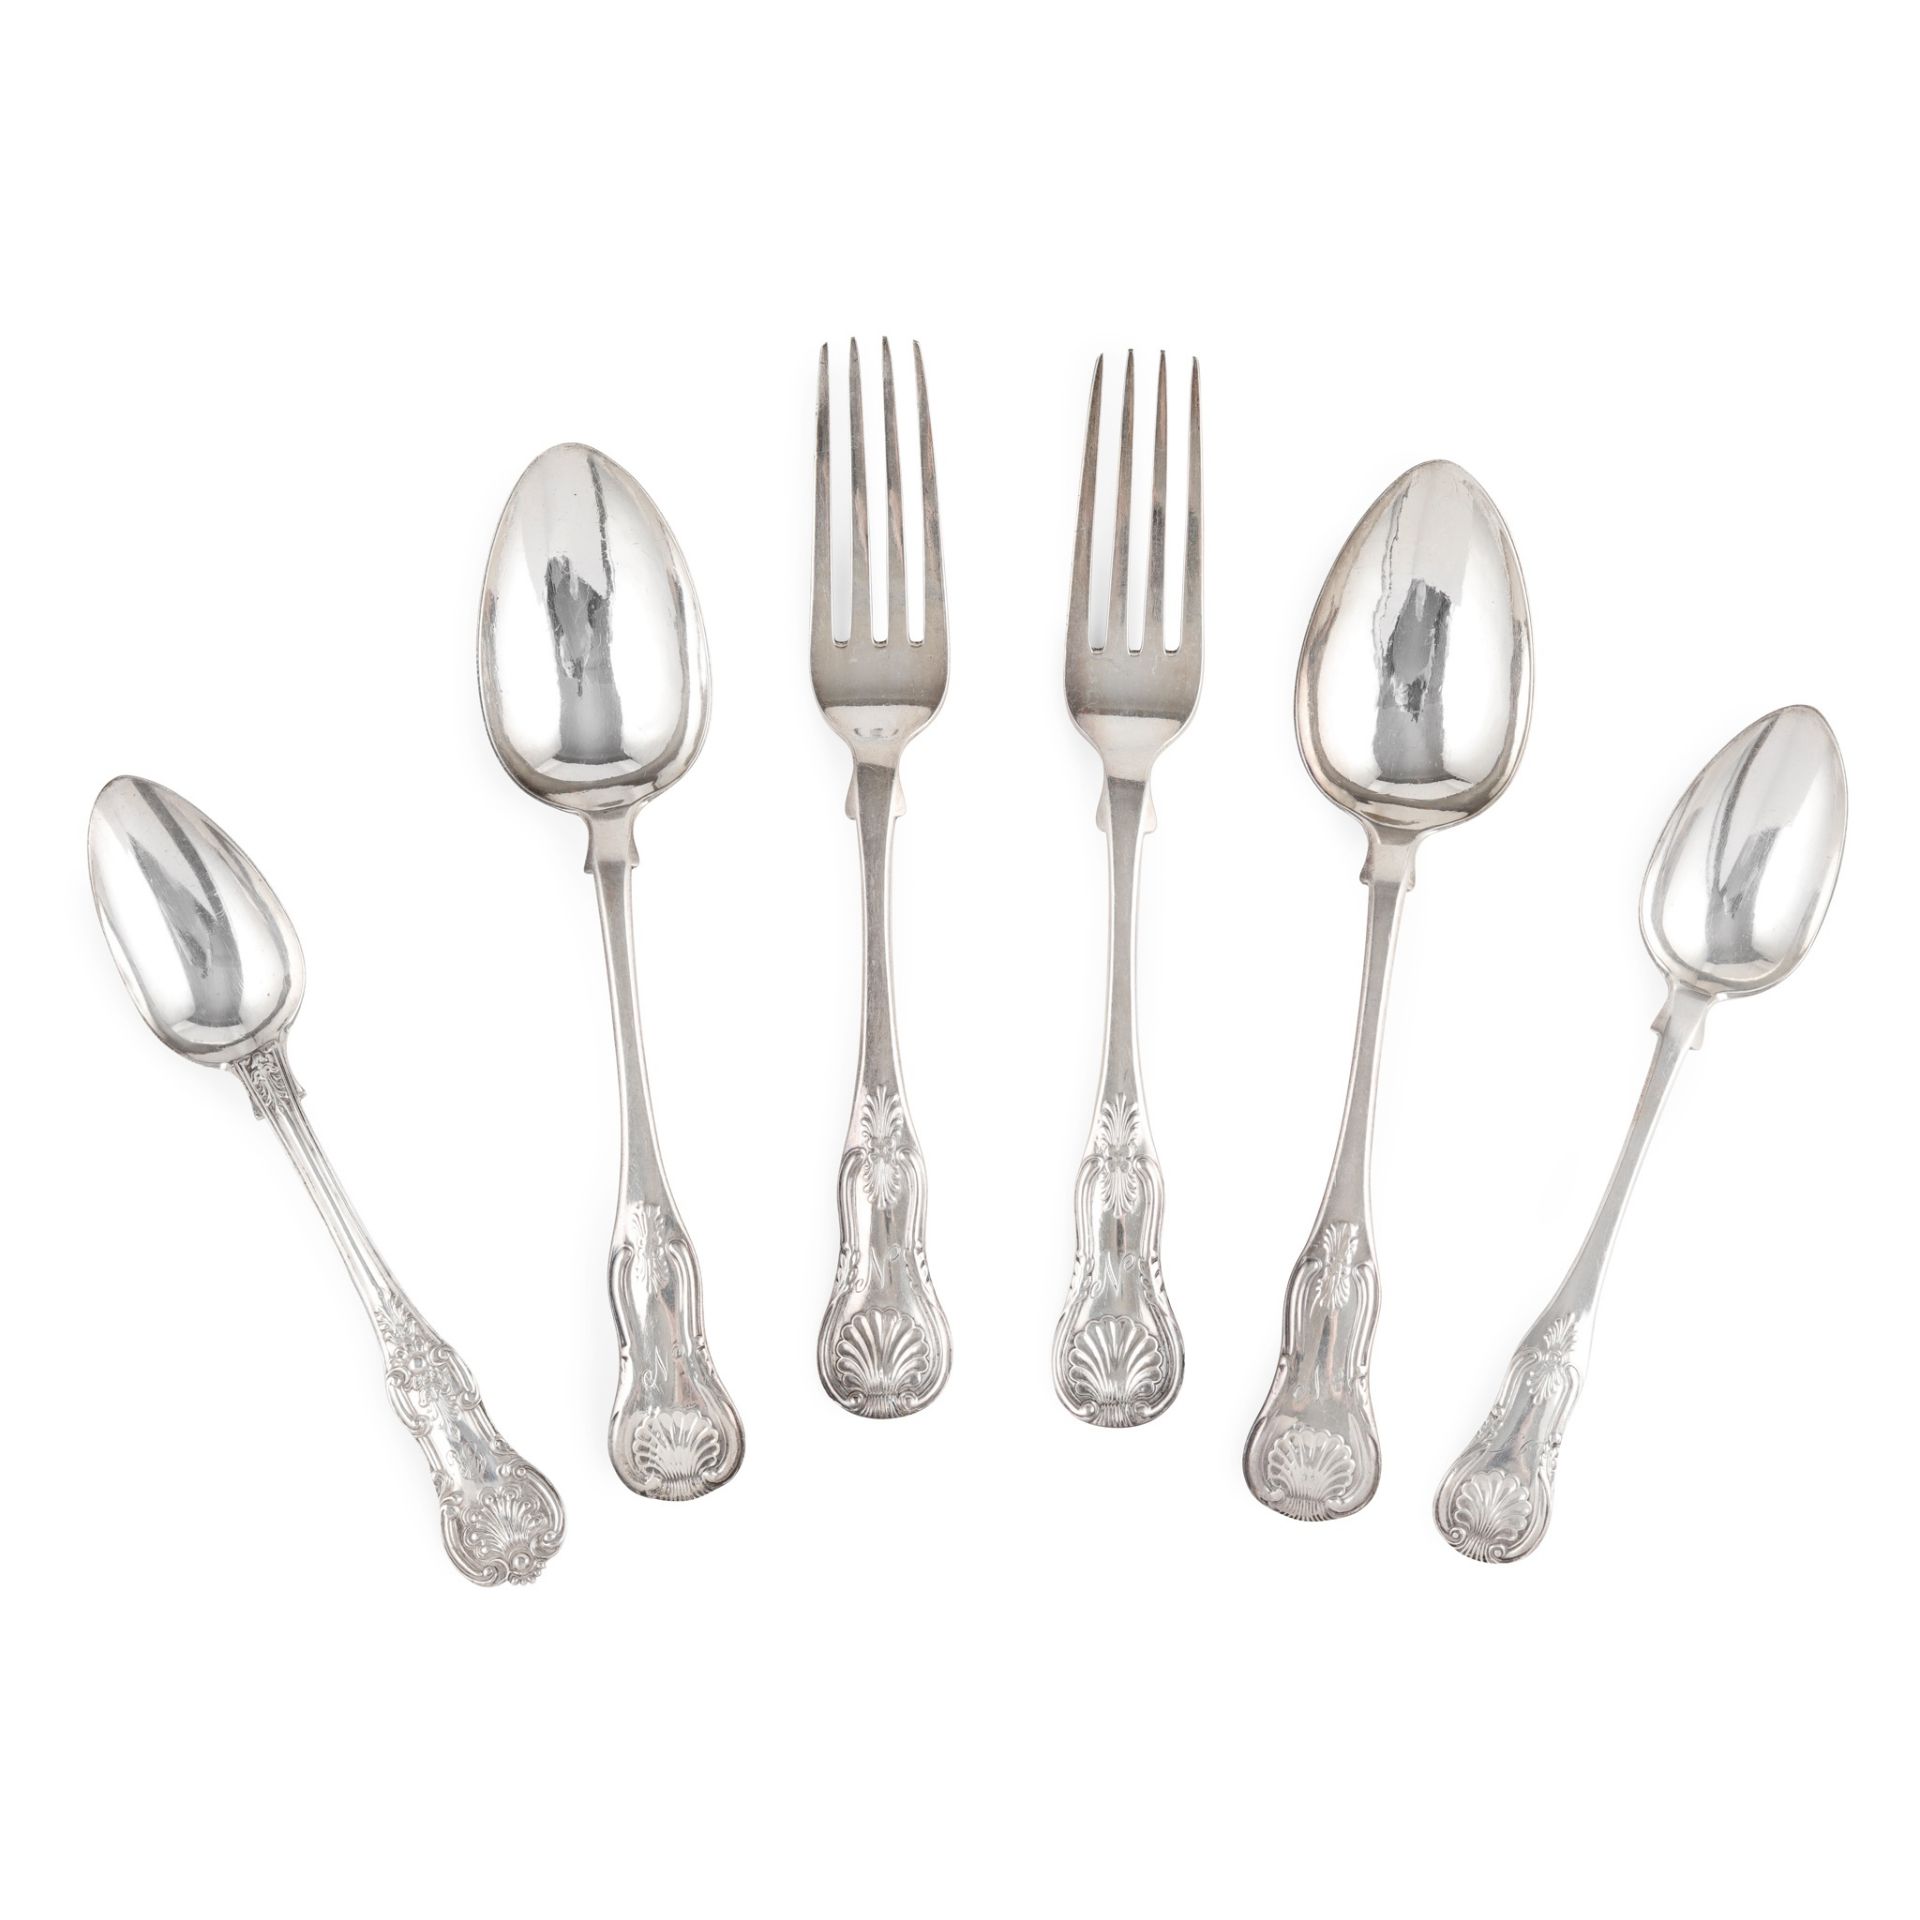 A matched suite of Scottish flatware